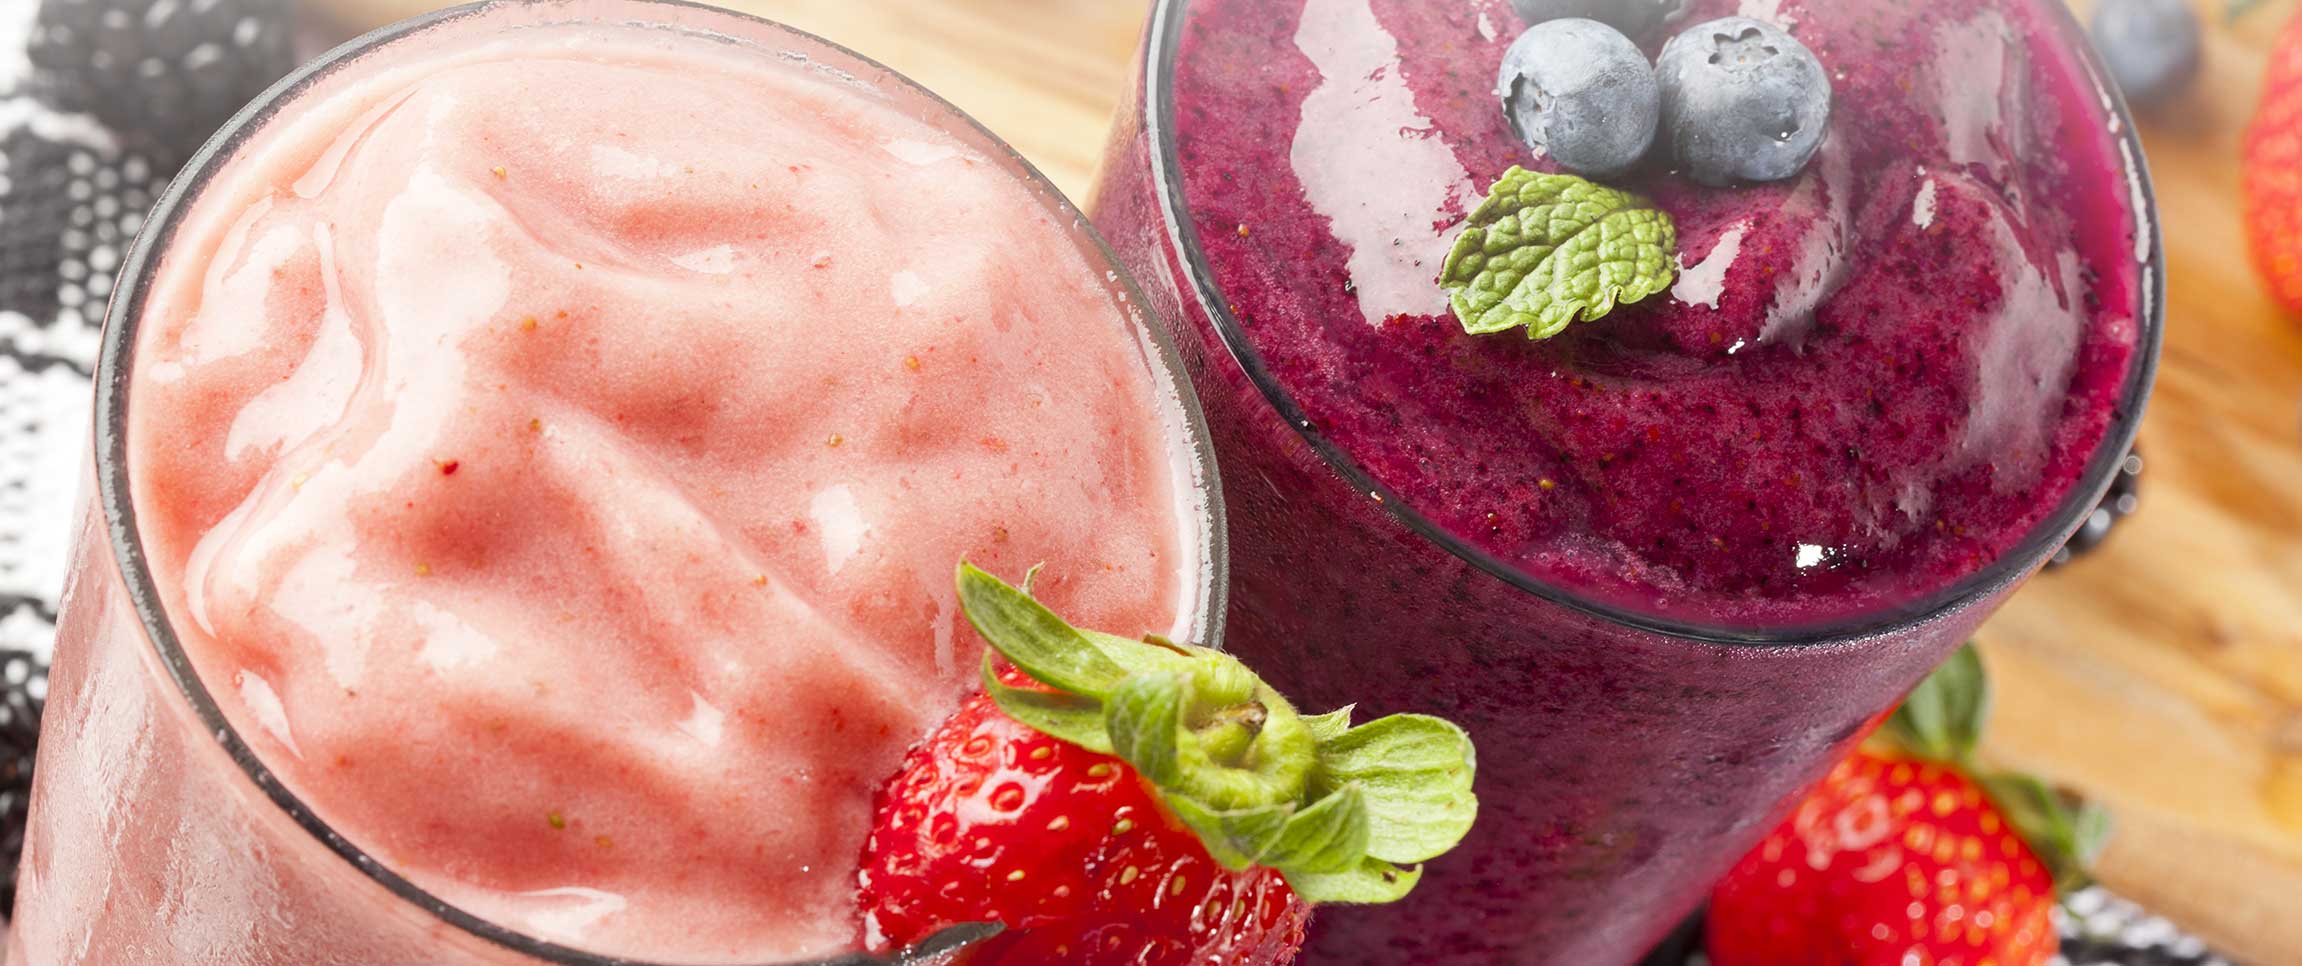 Smoothies on the Upswing